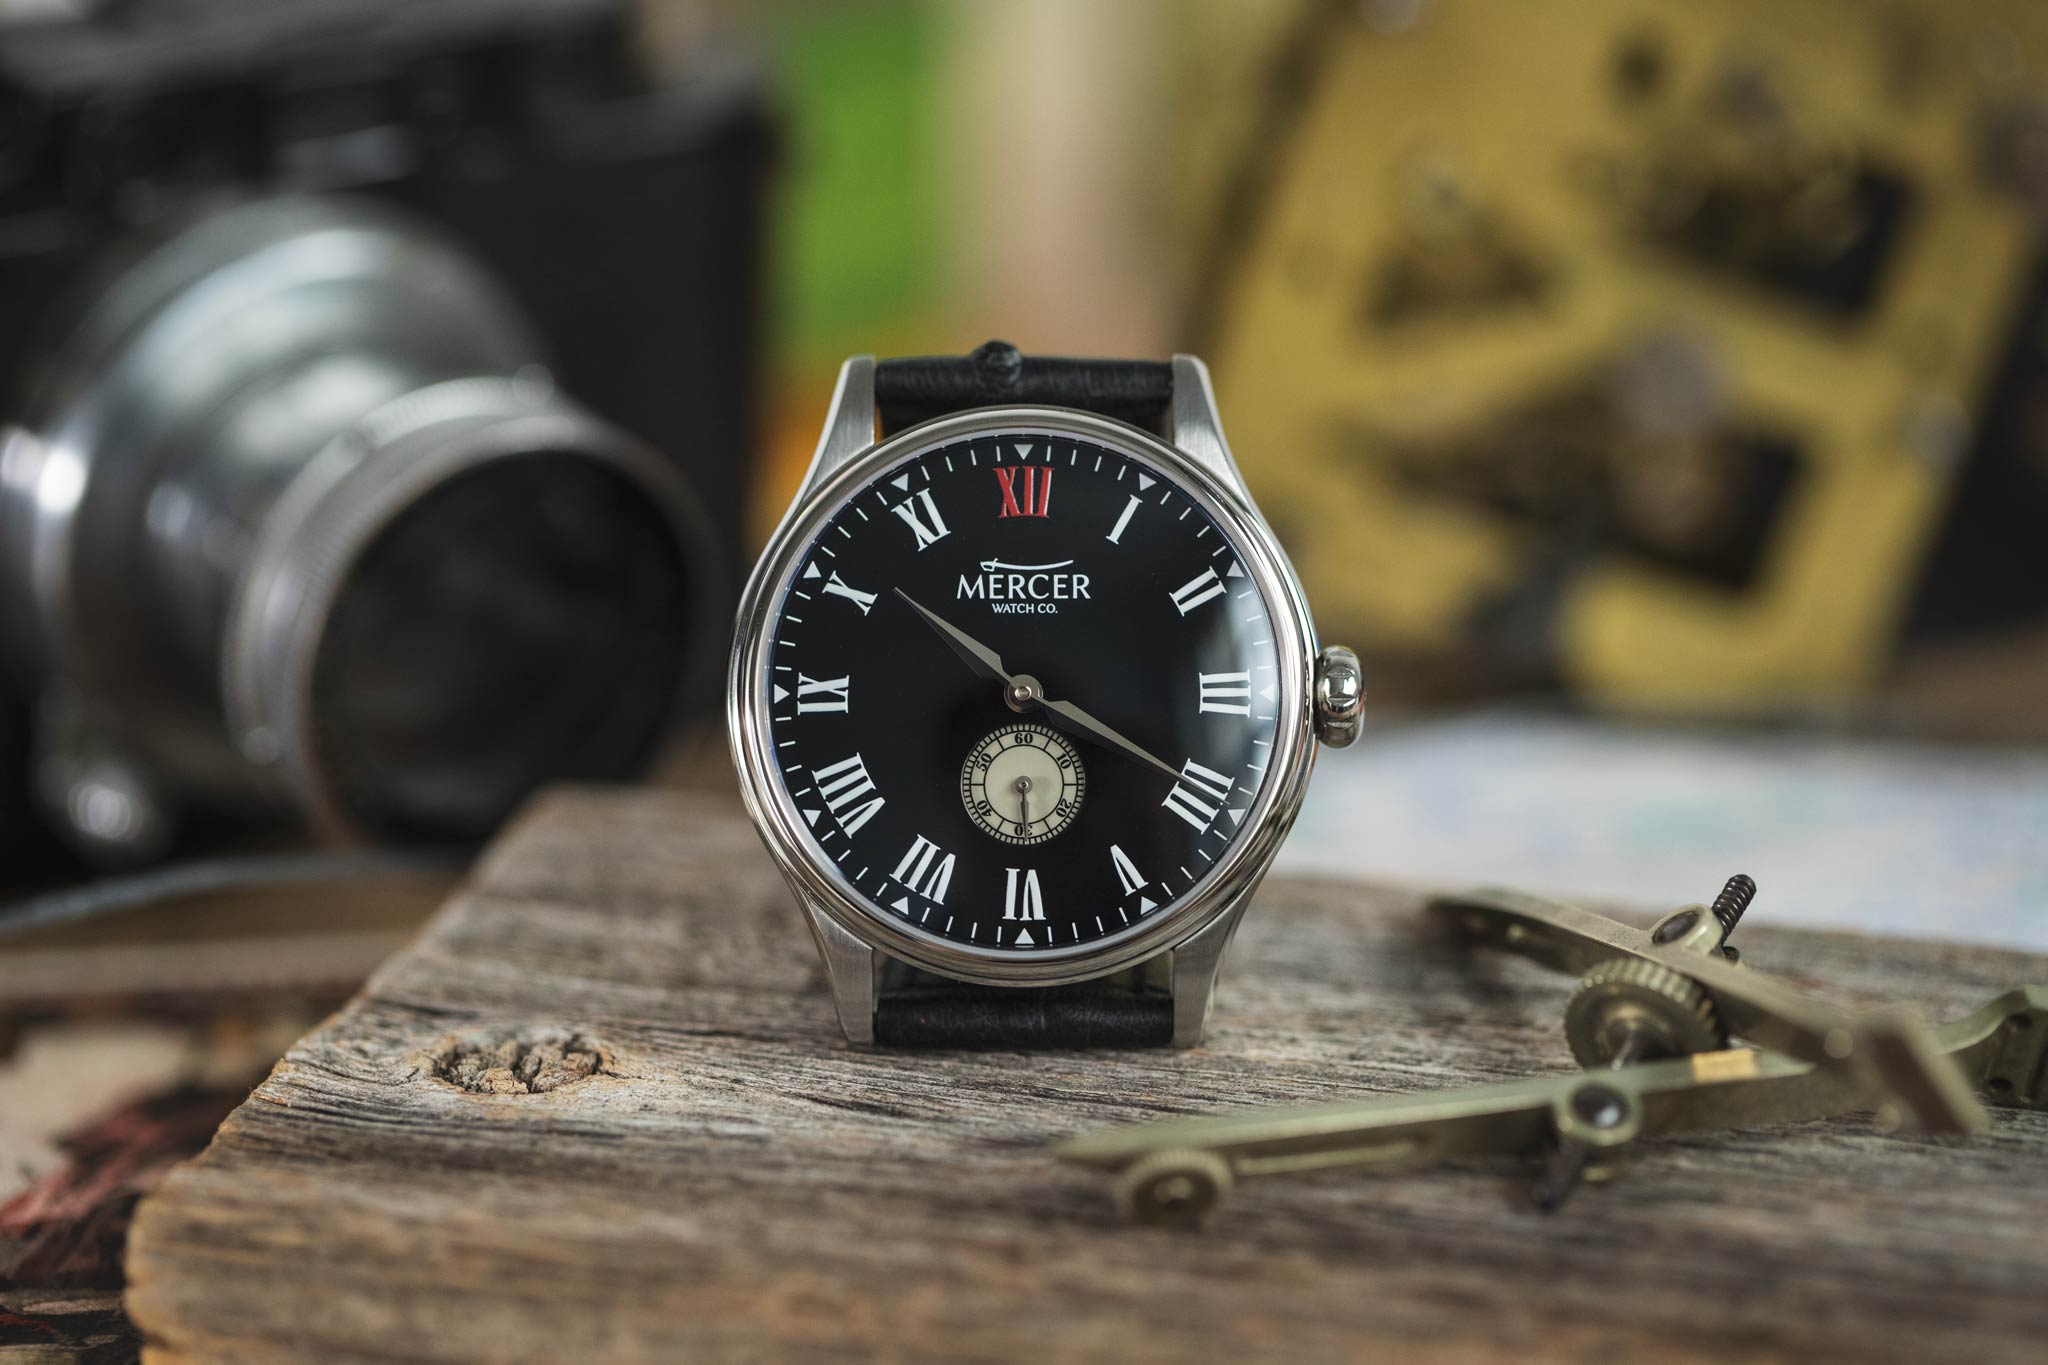 Hands on with the Mercer Voyager II Diver - Wristwatch Review